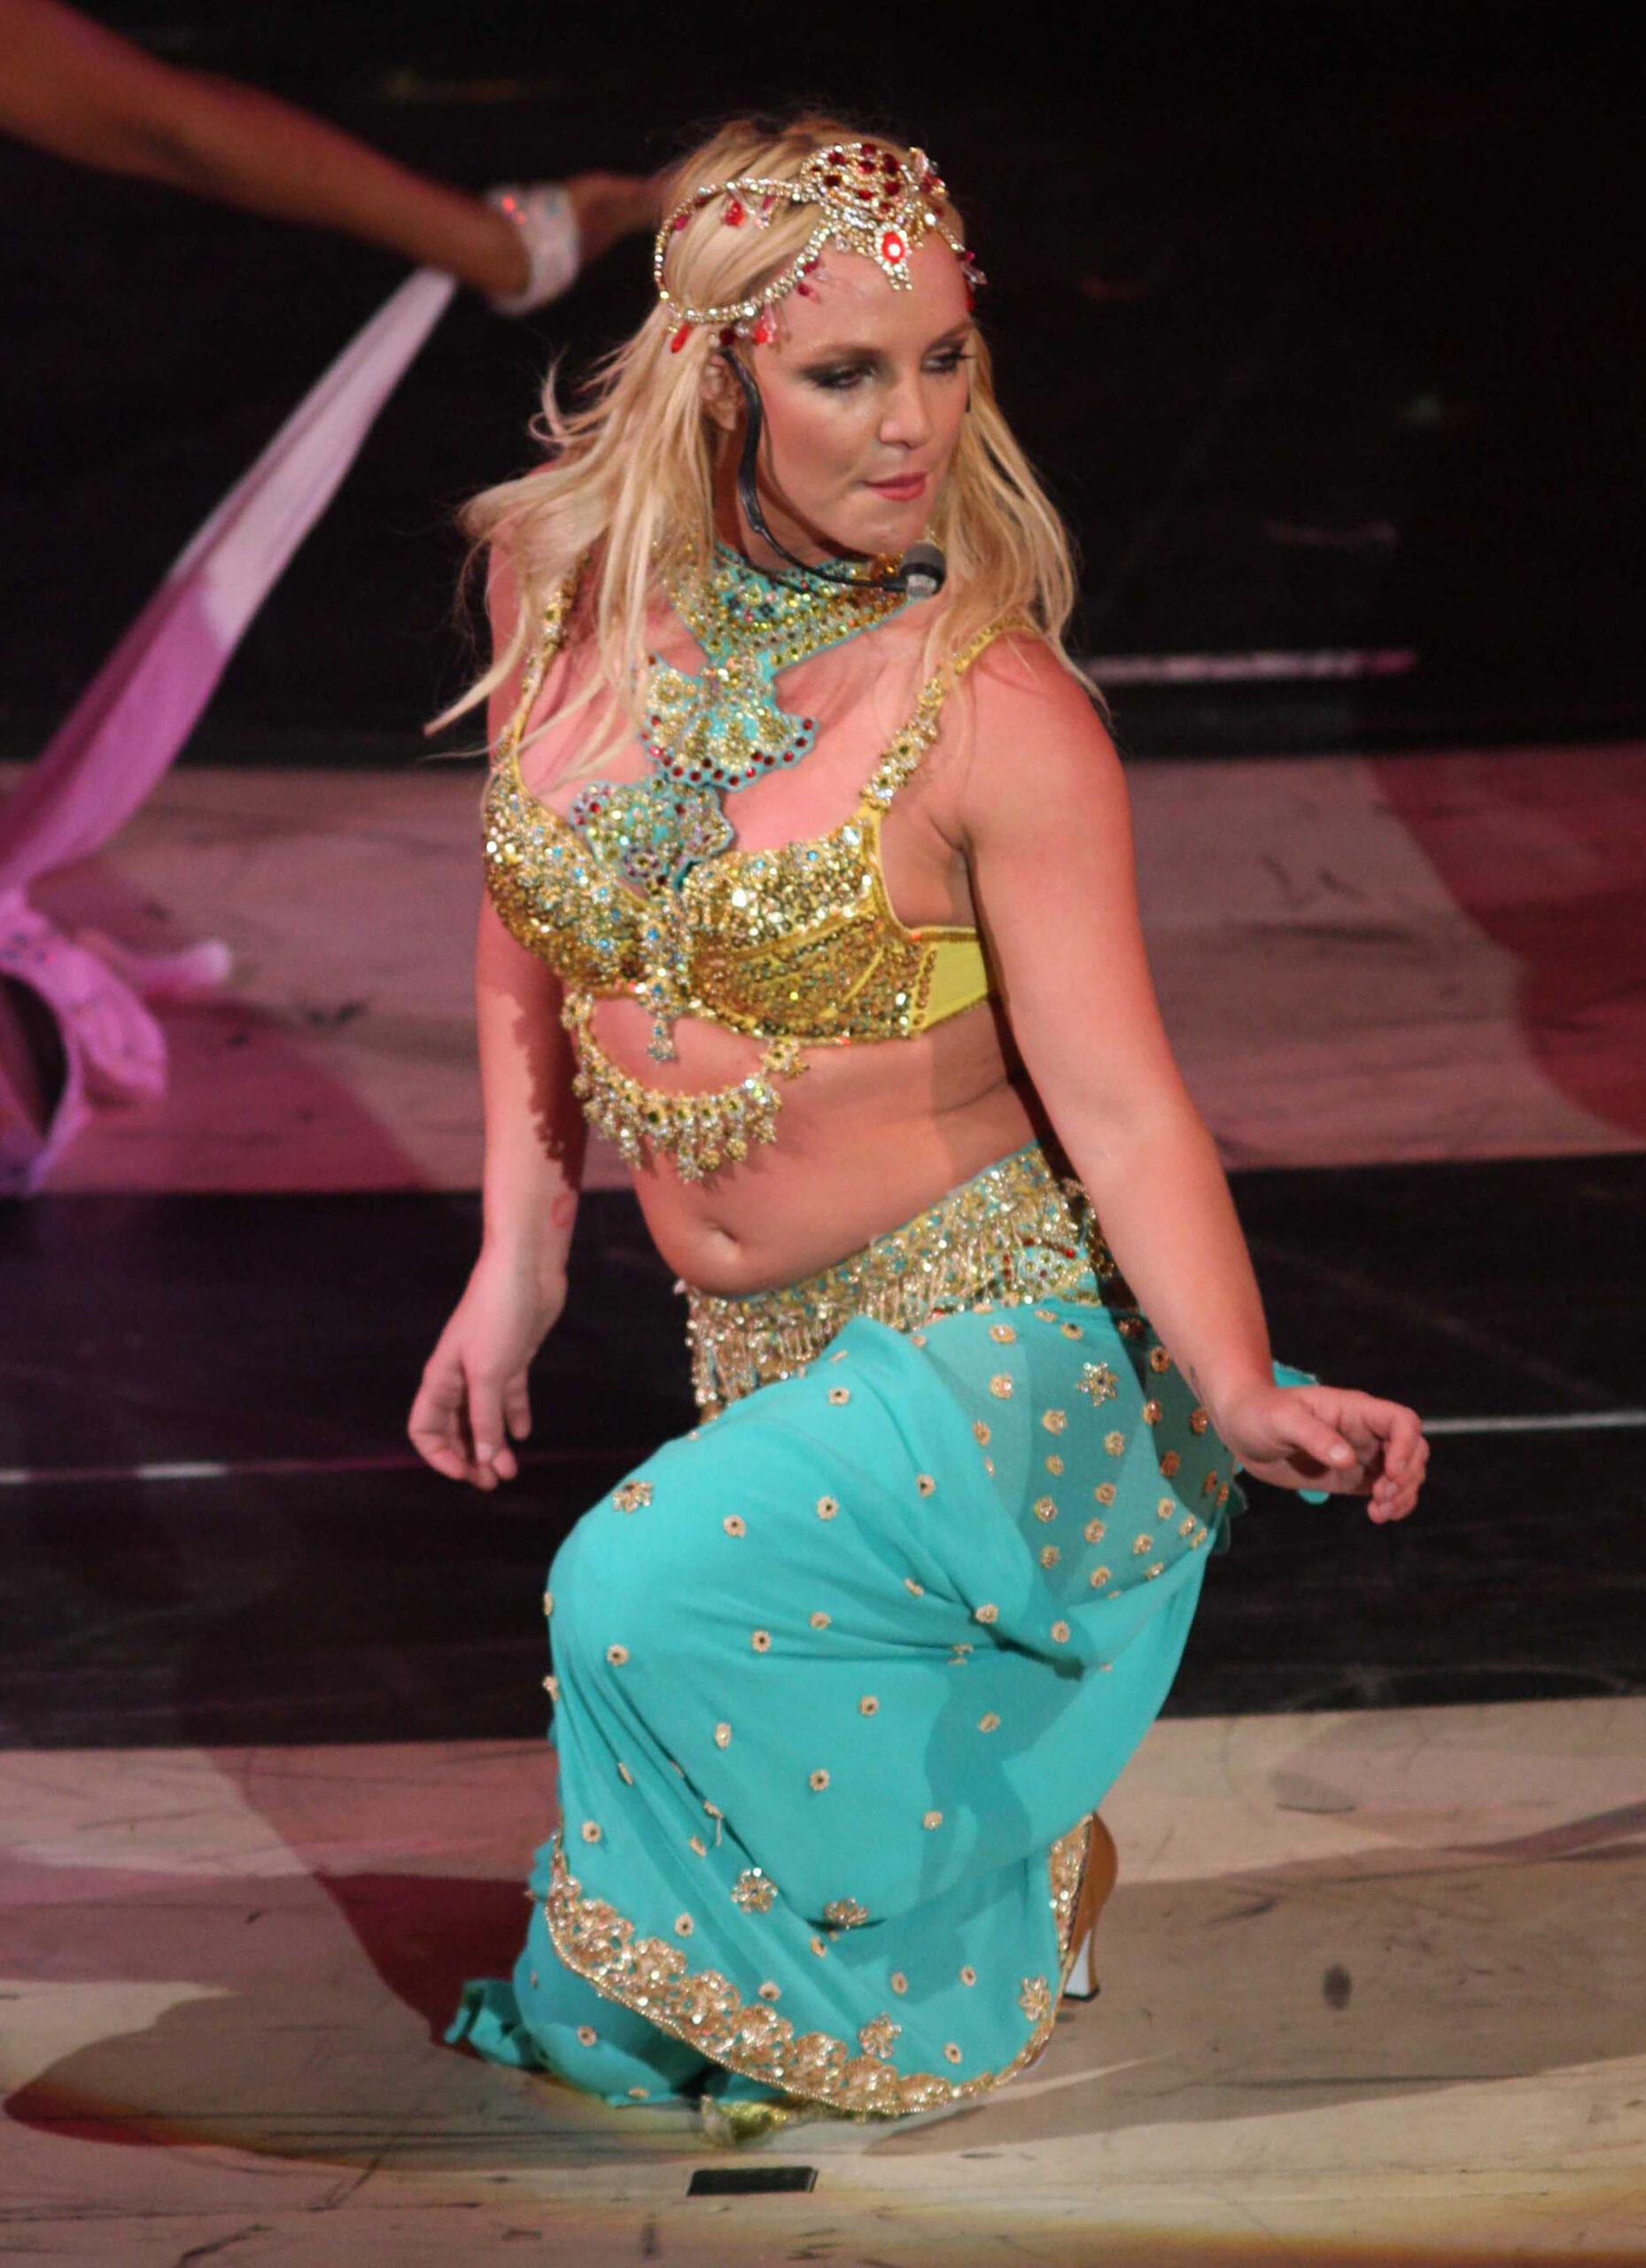 Britney Spears Is Never Performing On Stage Again?!